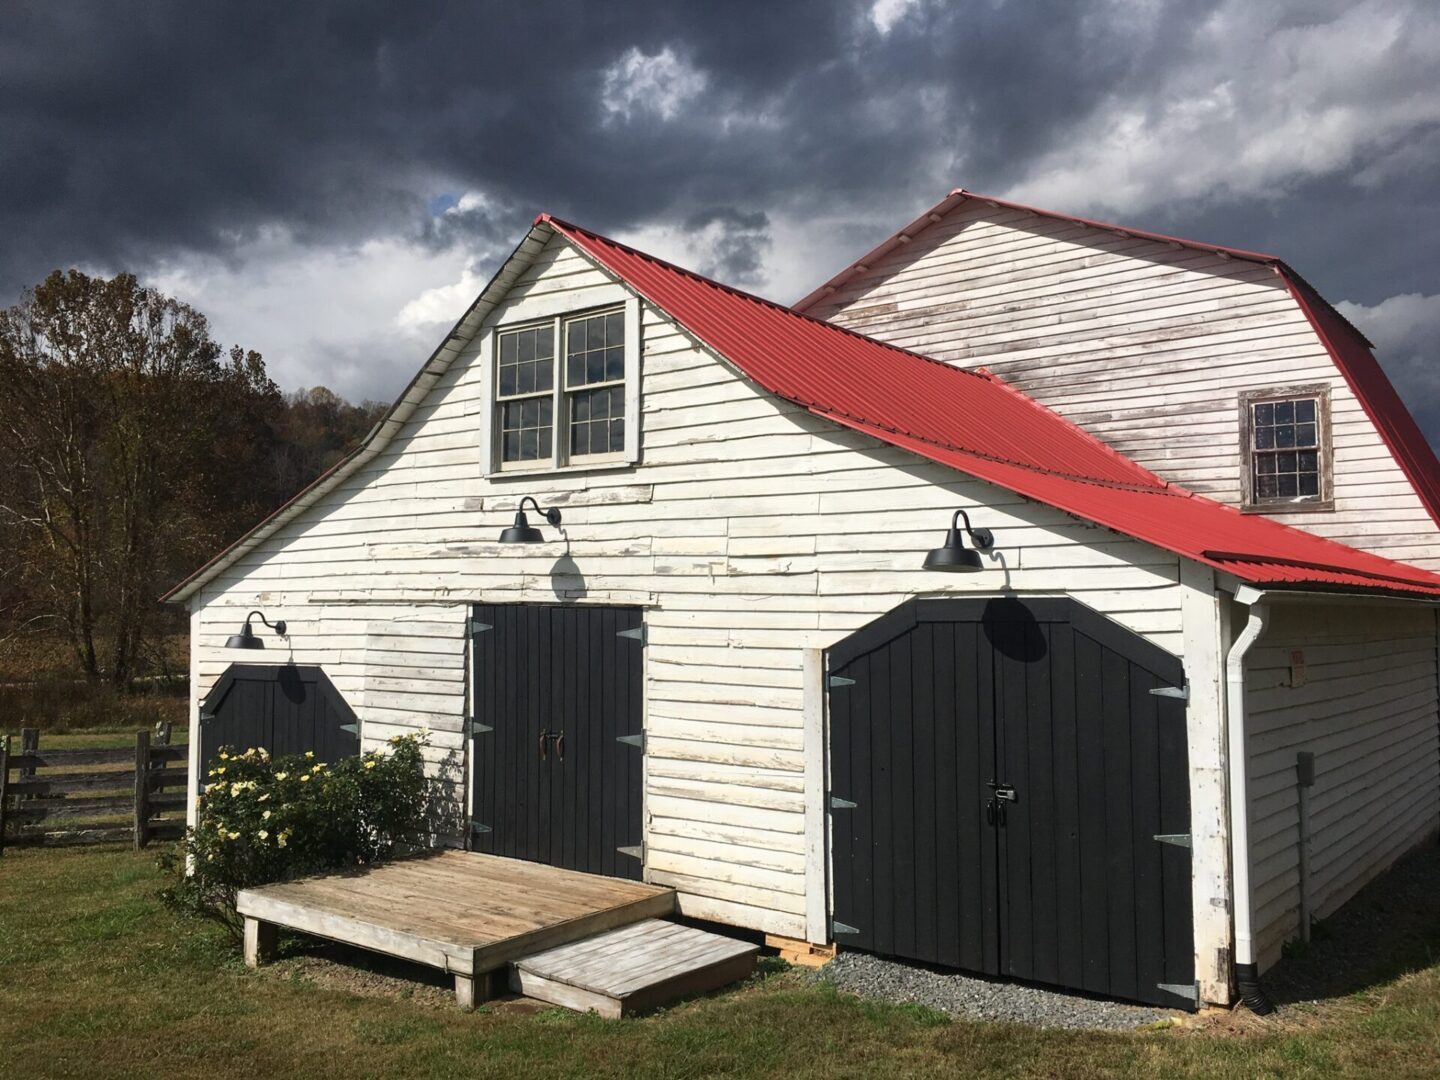 A white barn with black doors and red roof image